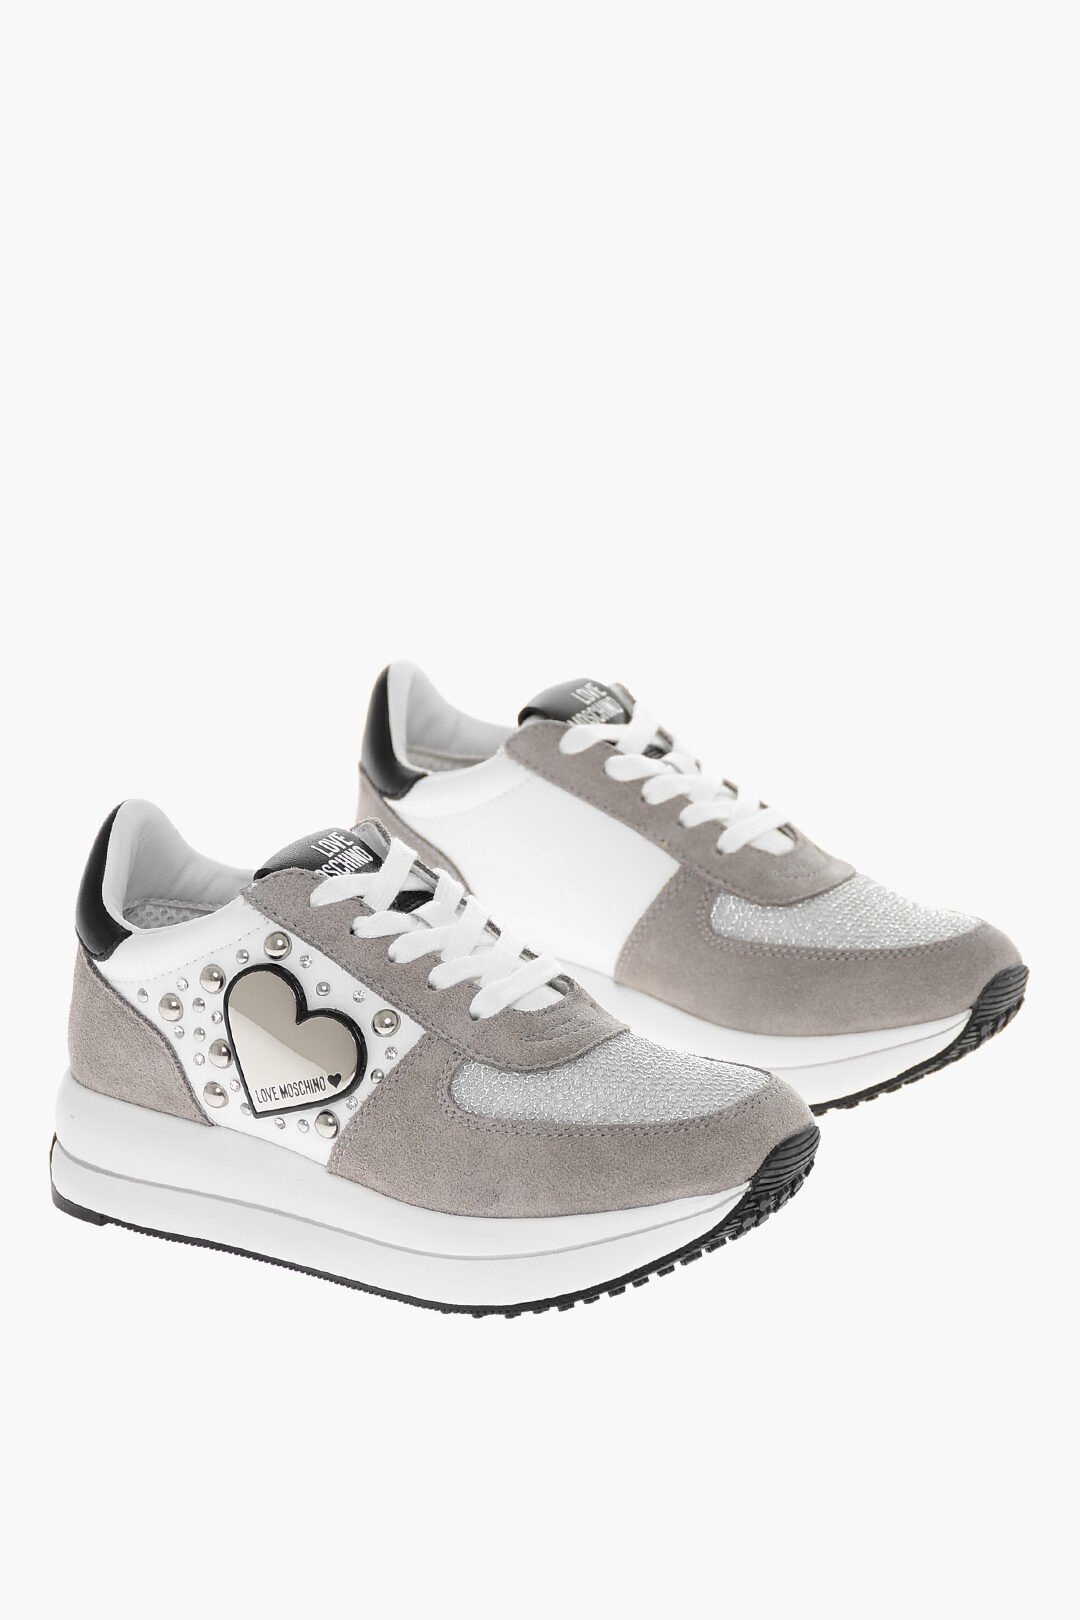 MOSCHINO モスキーノ スニーカー JA15064G1HIAD10A レディース LOVE LOW SUEDE SNEAKERS WITH STUD EMB..